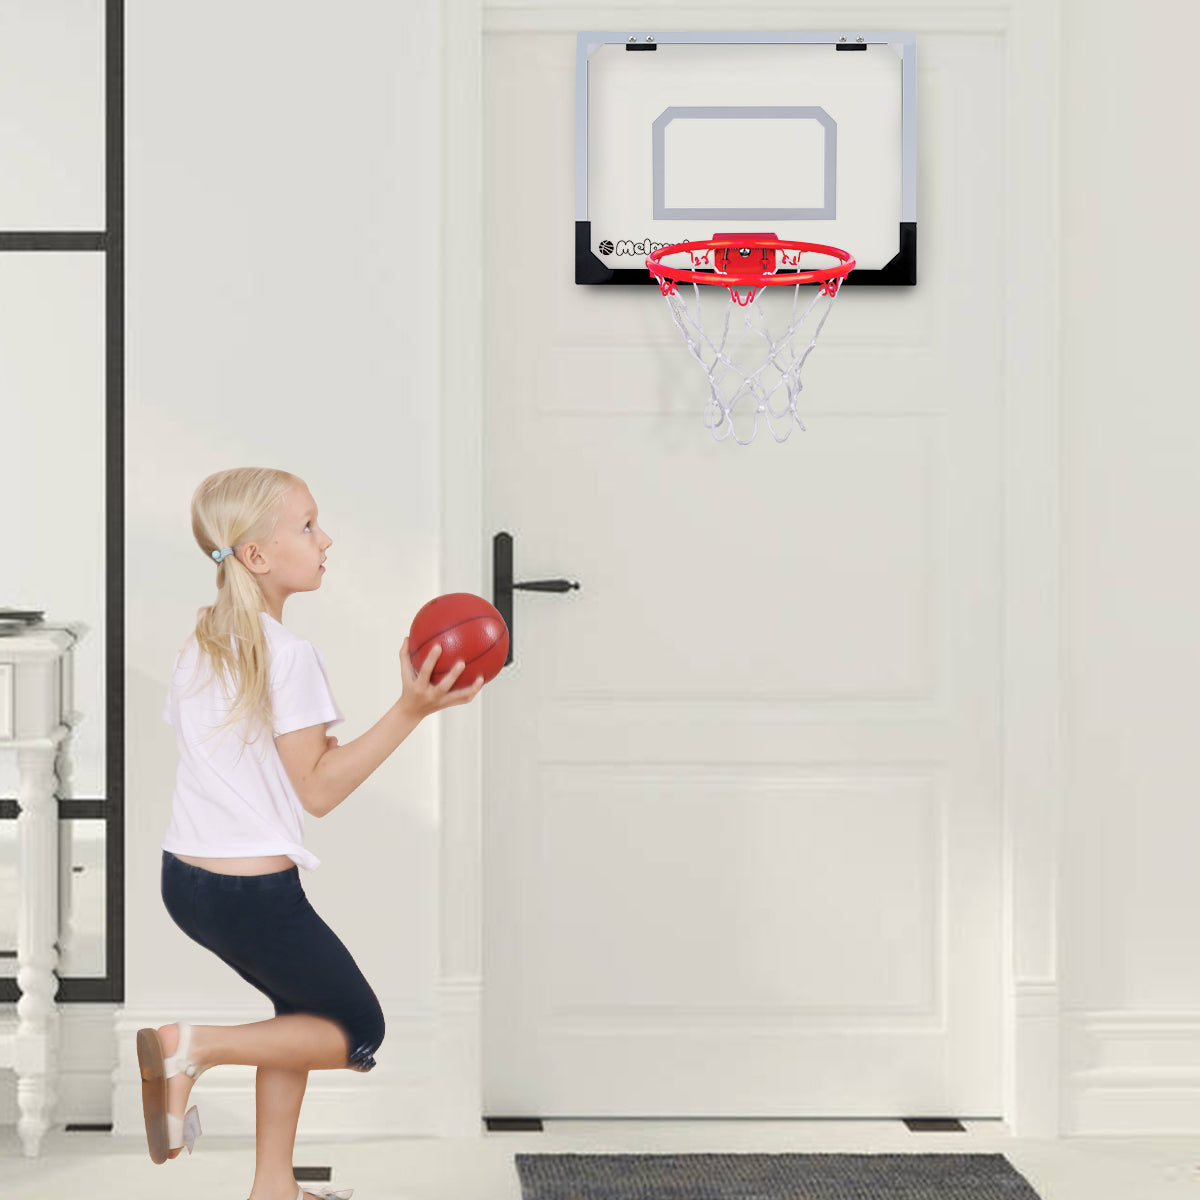 Basketball Hoop for Toddlers - Includes 4 Rubber Balls